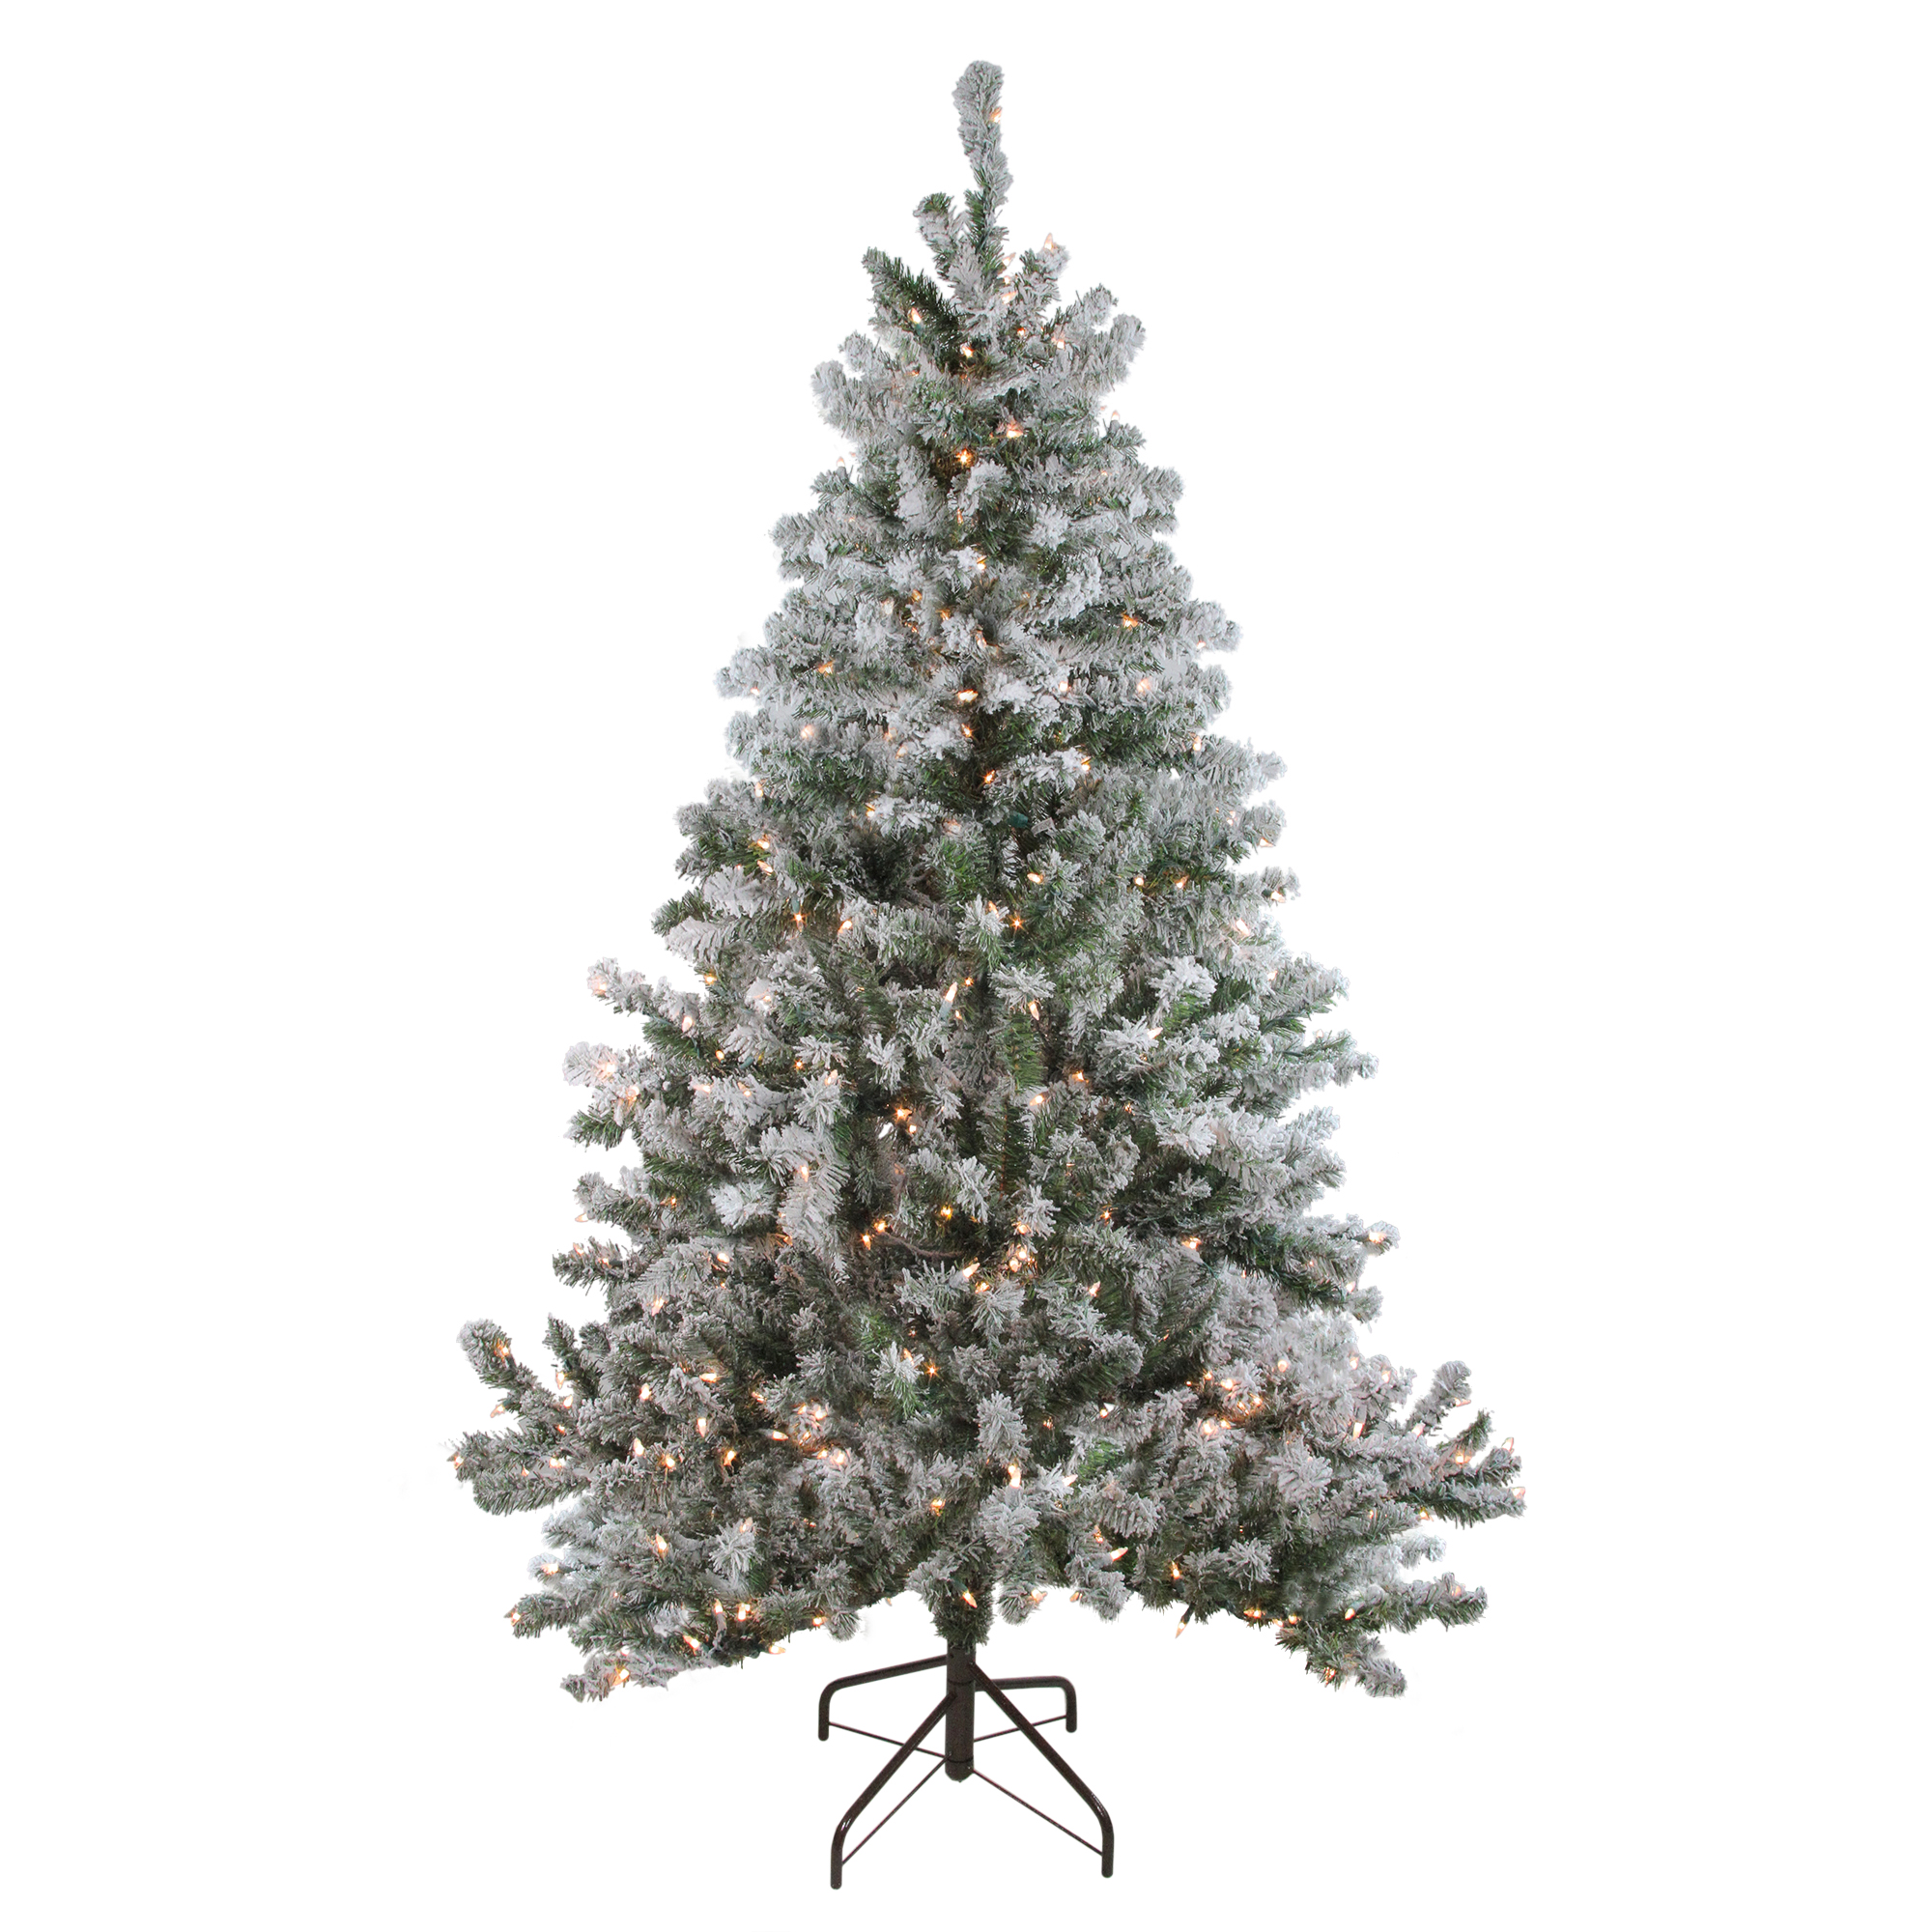 Northlight 7' Pre-Lit Flocked Balsam Pine Artificial Christmas Tree - Clear Lights